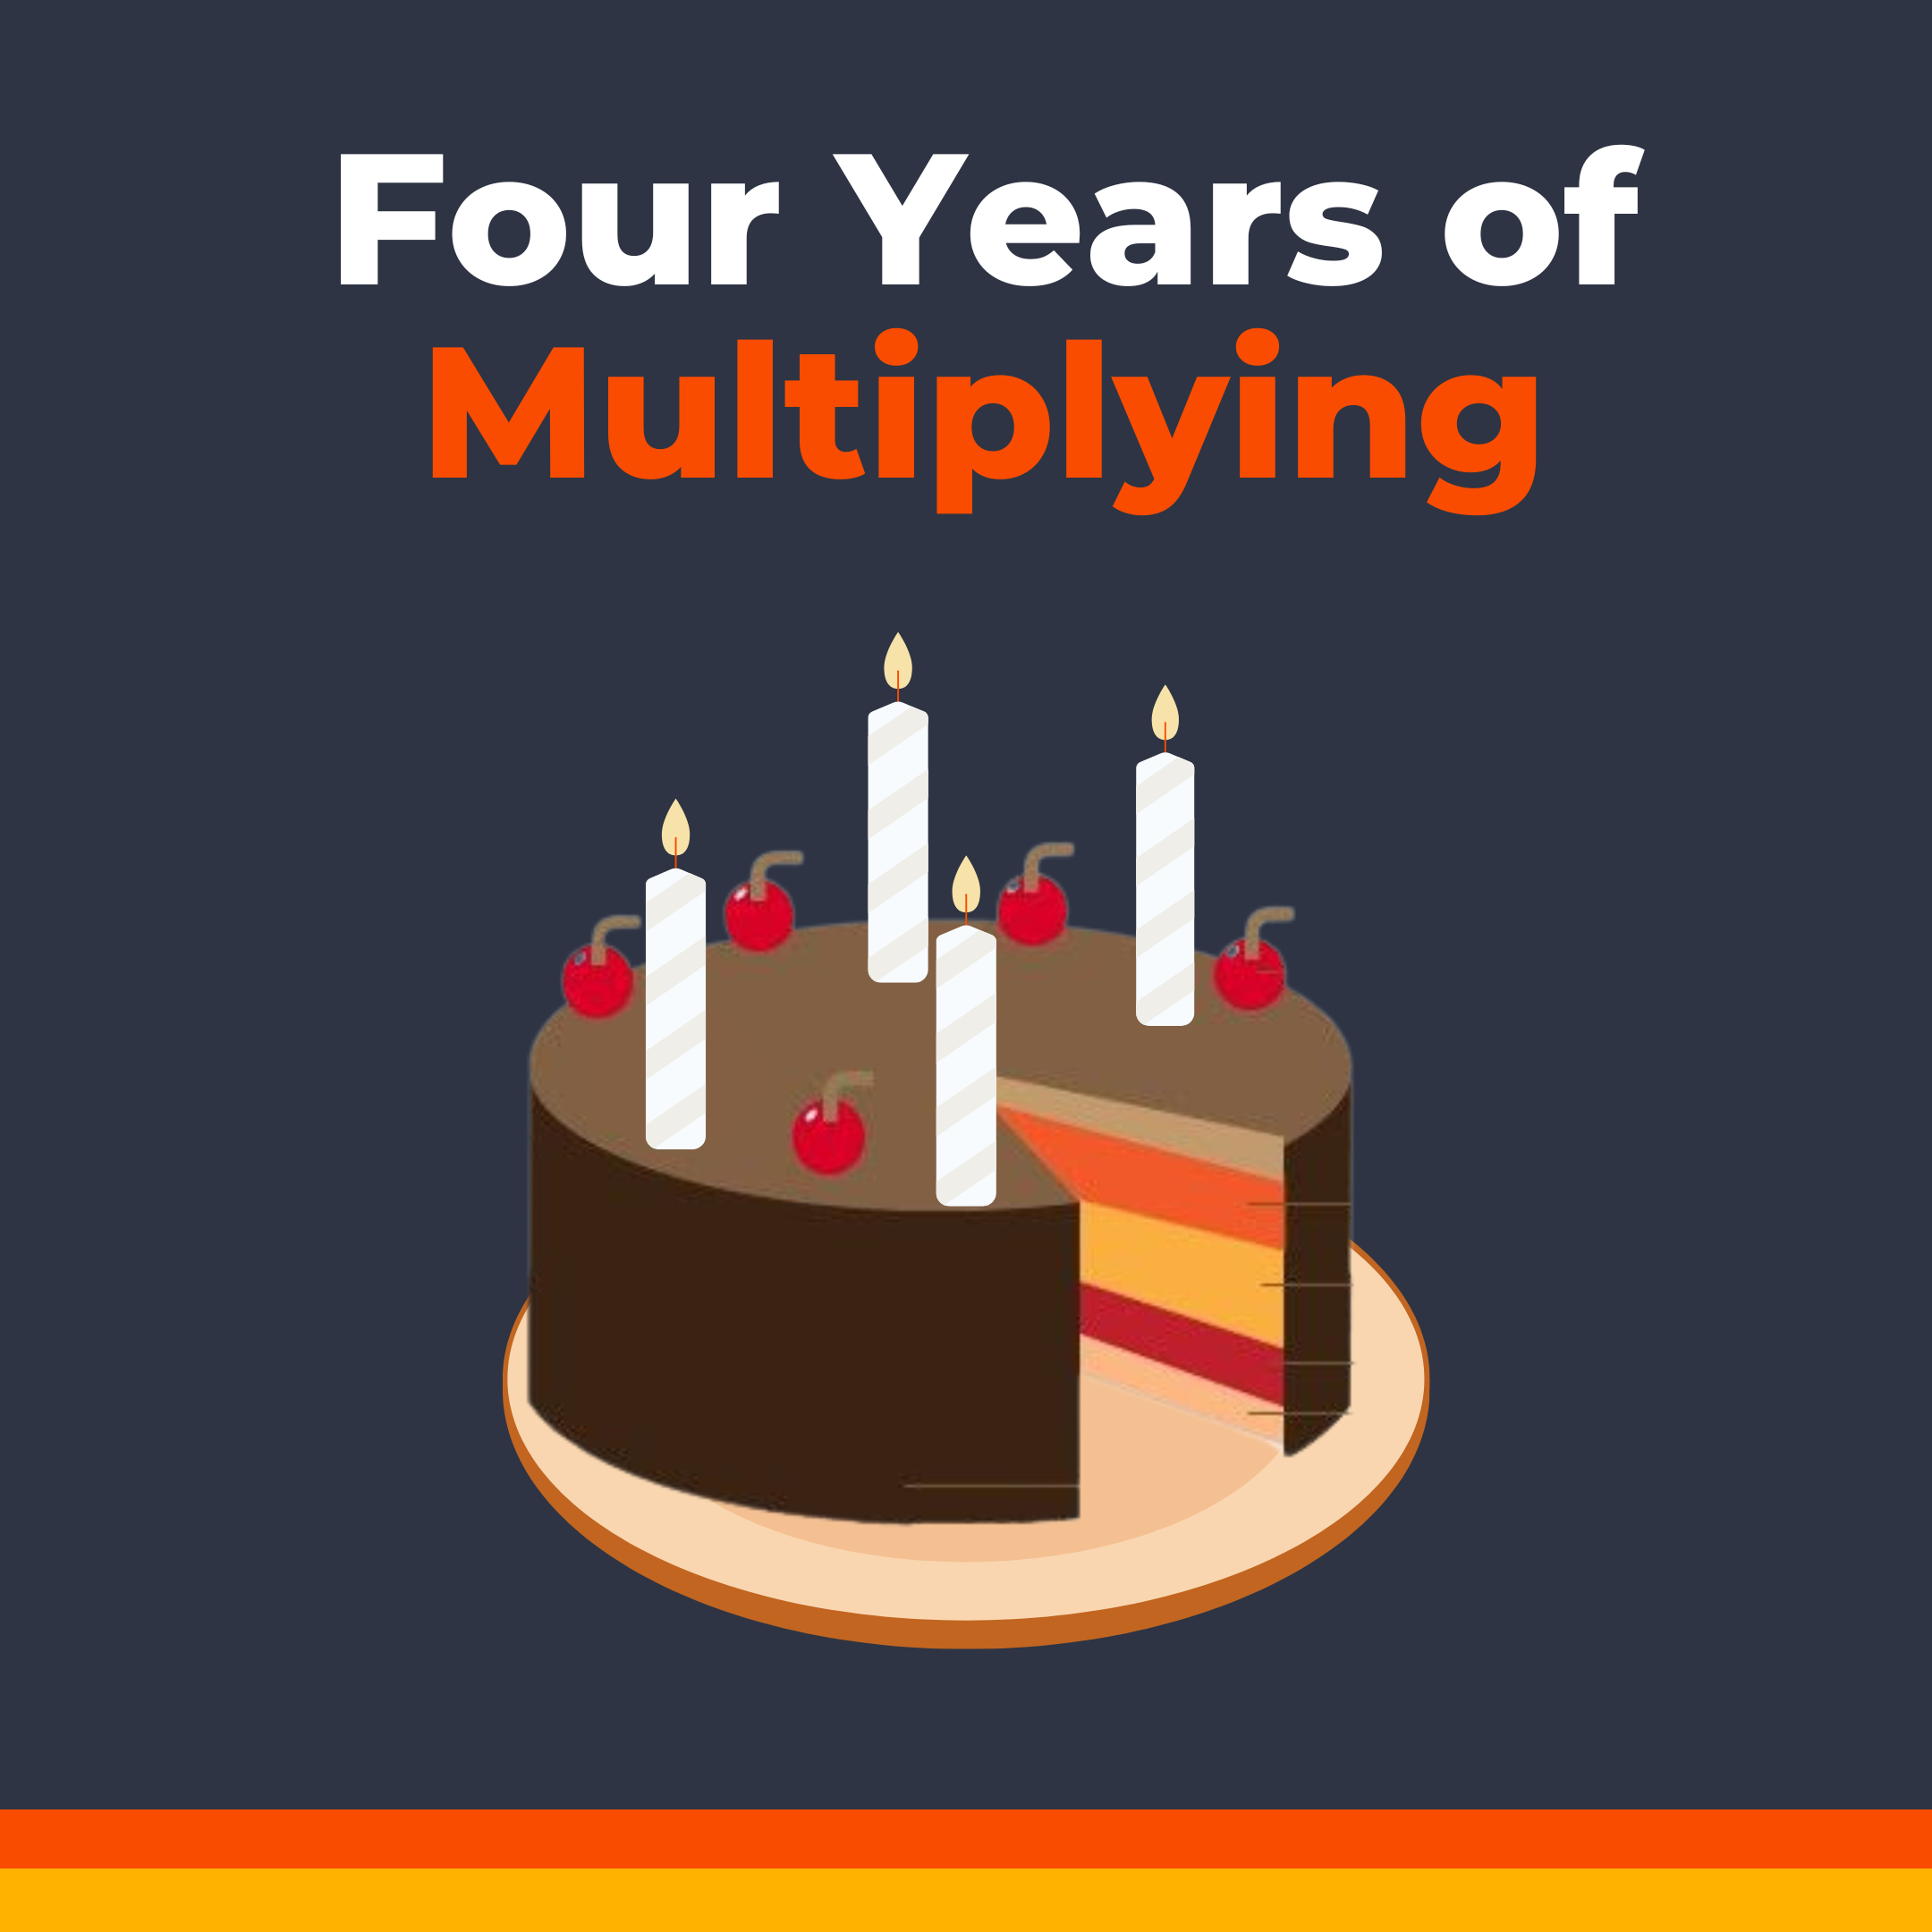 Looking Back at Four Years of Multiplying